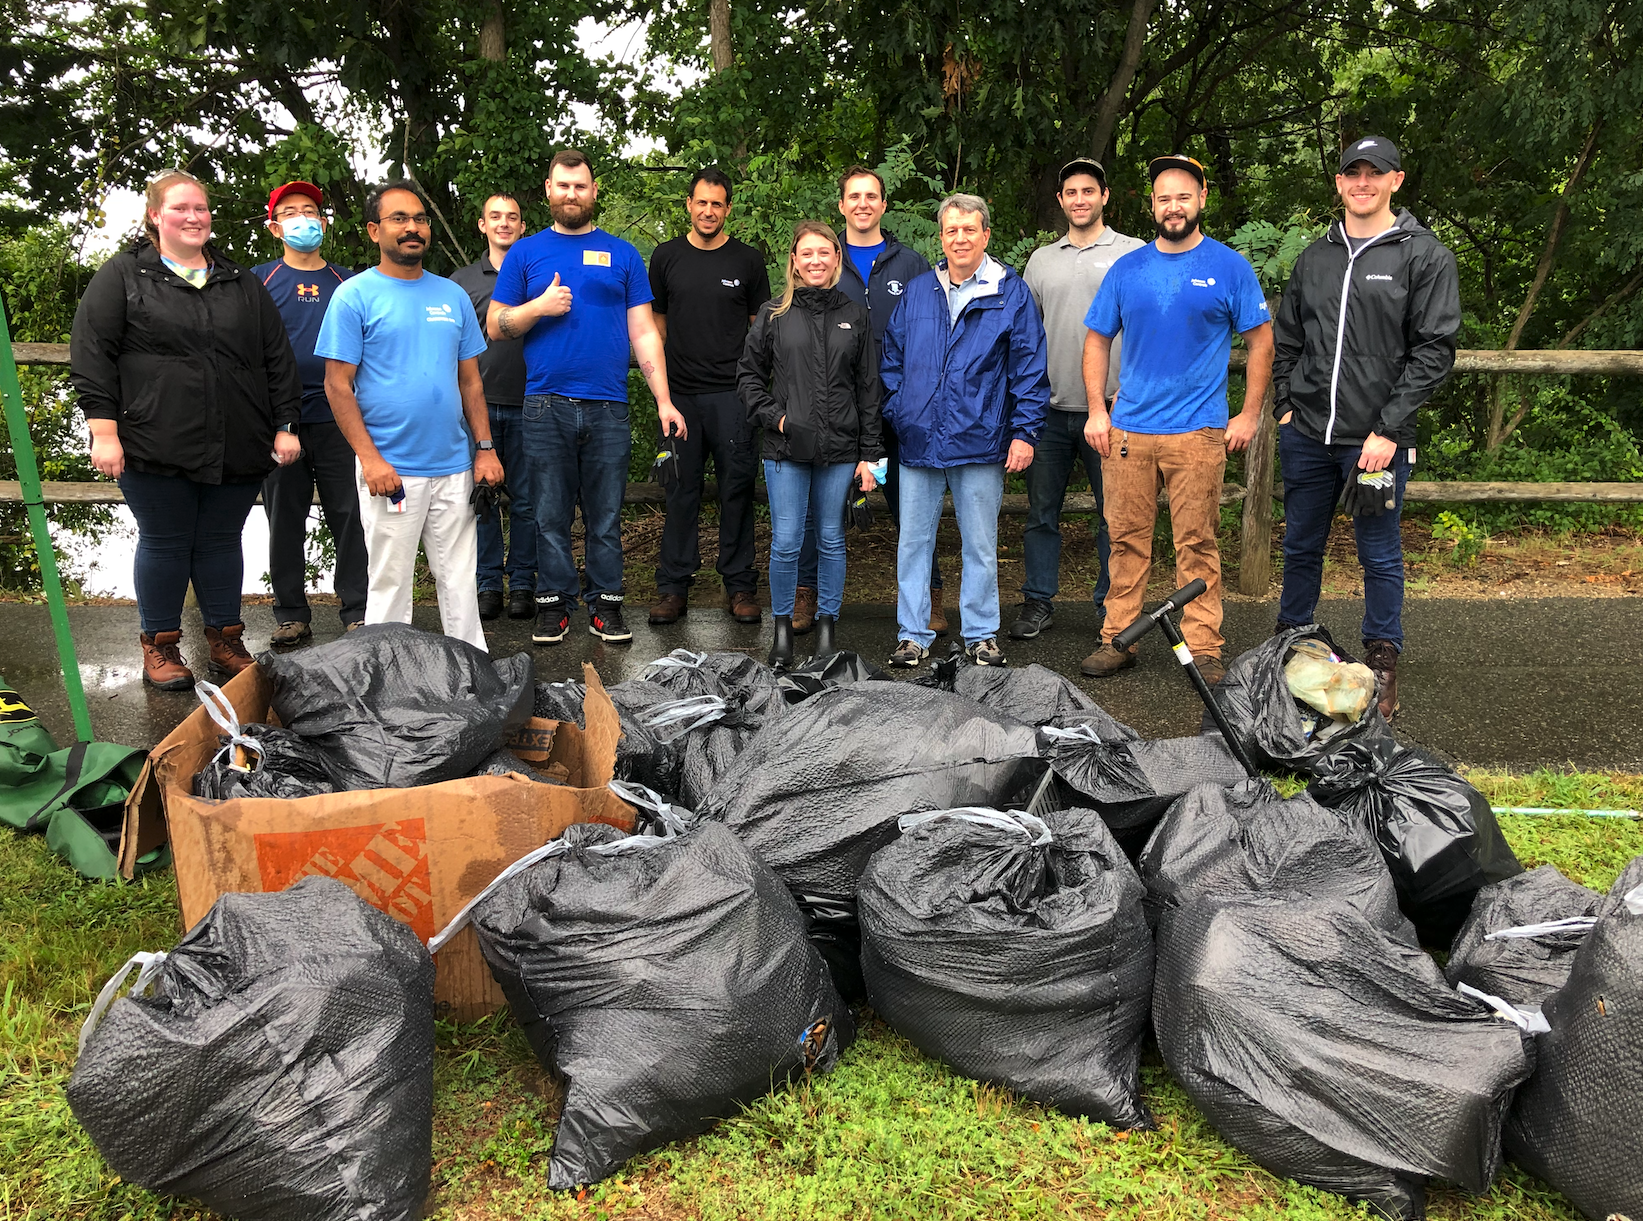 Volunteers-in-front-of-their-collected-trash-at-a-Save-The-Bay-cleanup